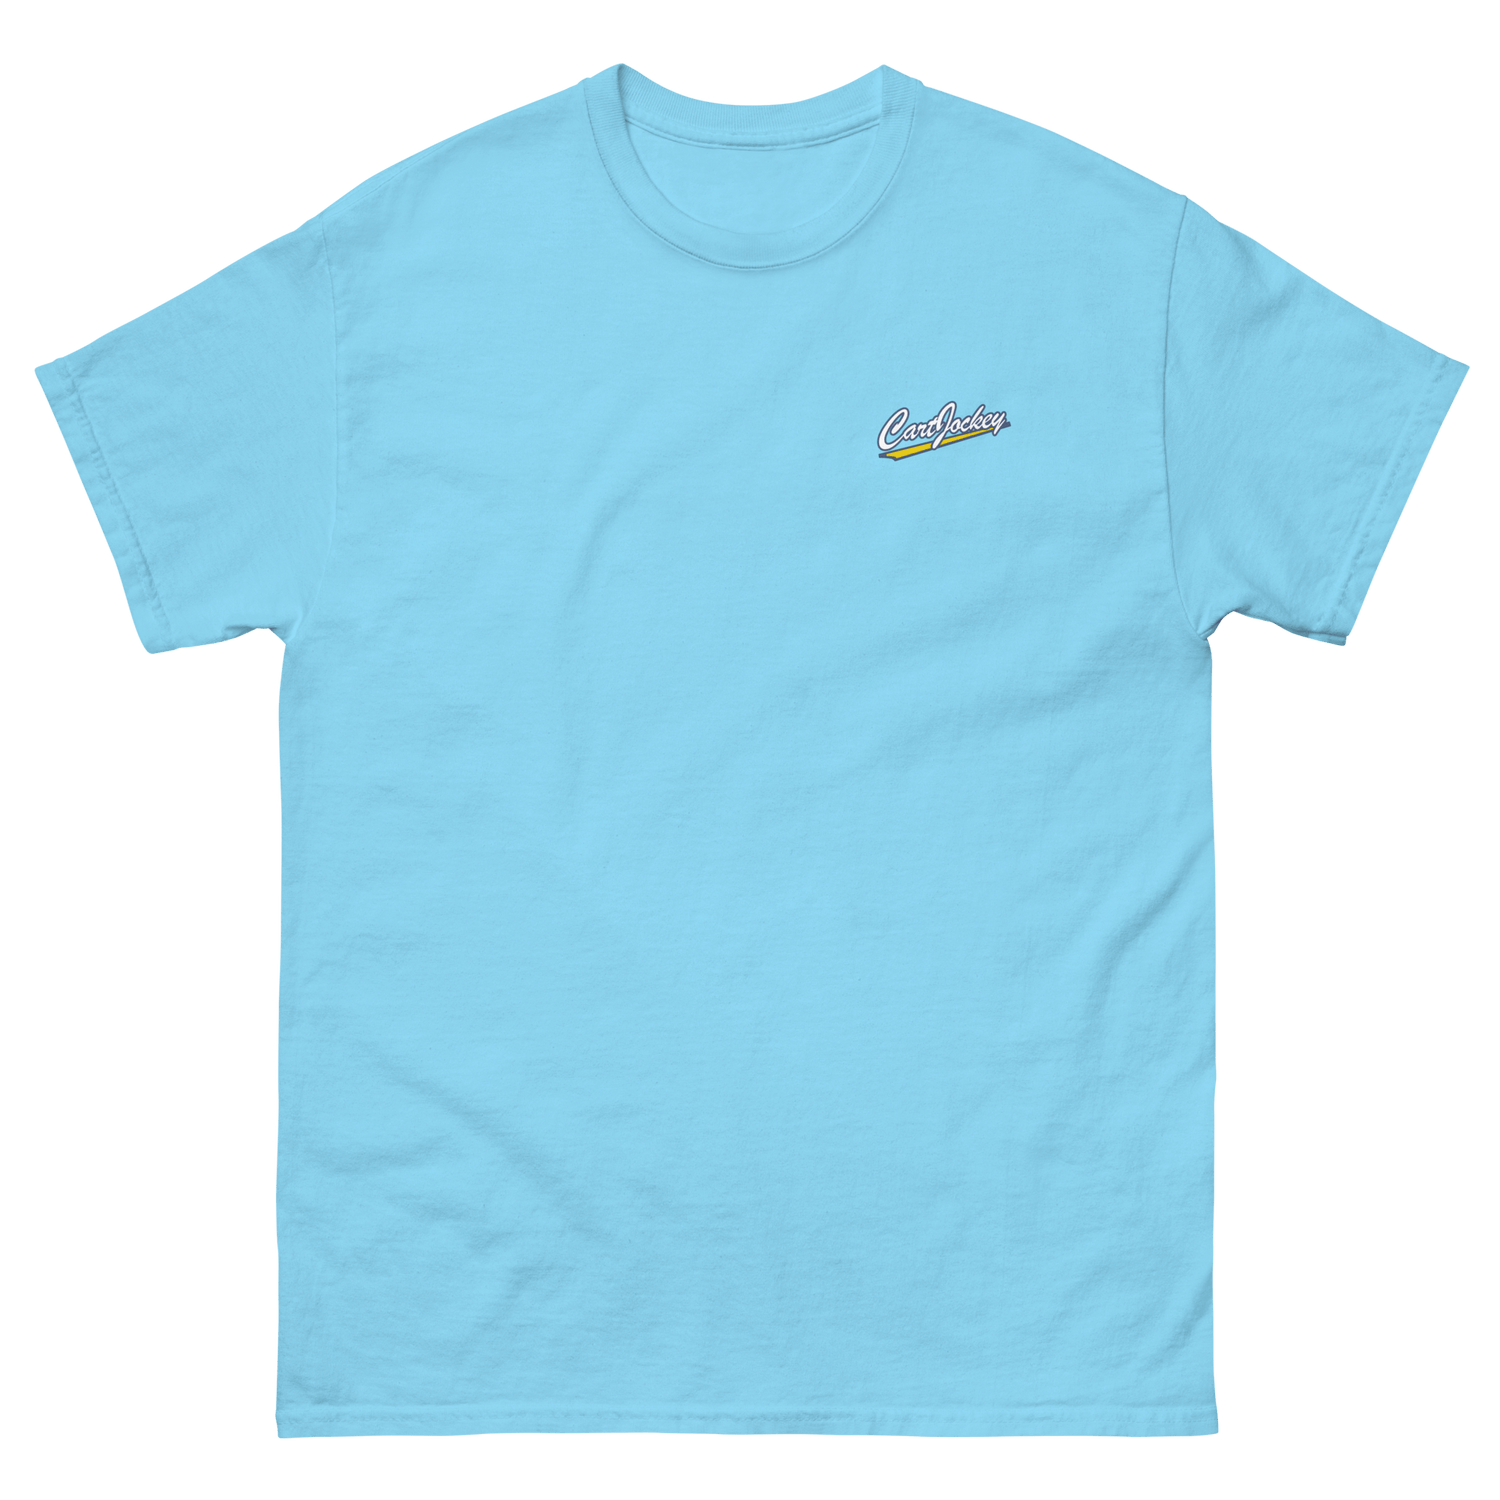 a Men's Cart Jockey Graphic tee with a rainbow embroidered logo.